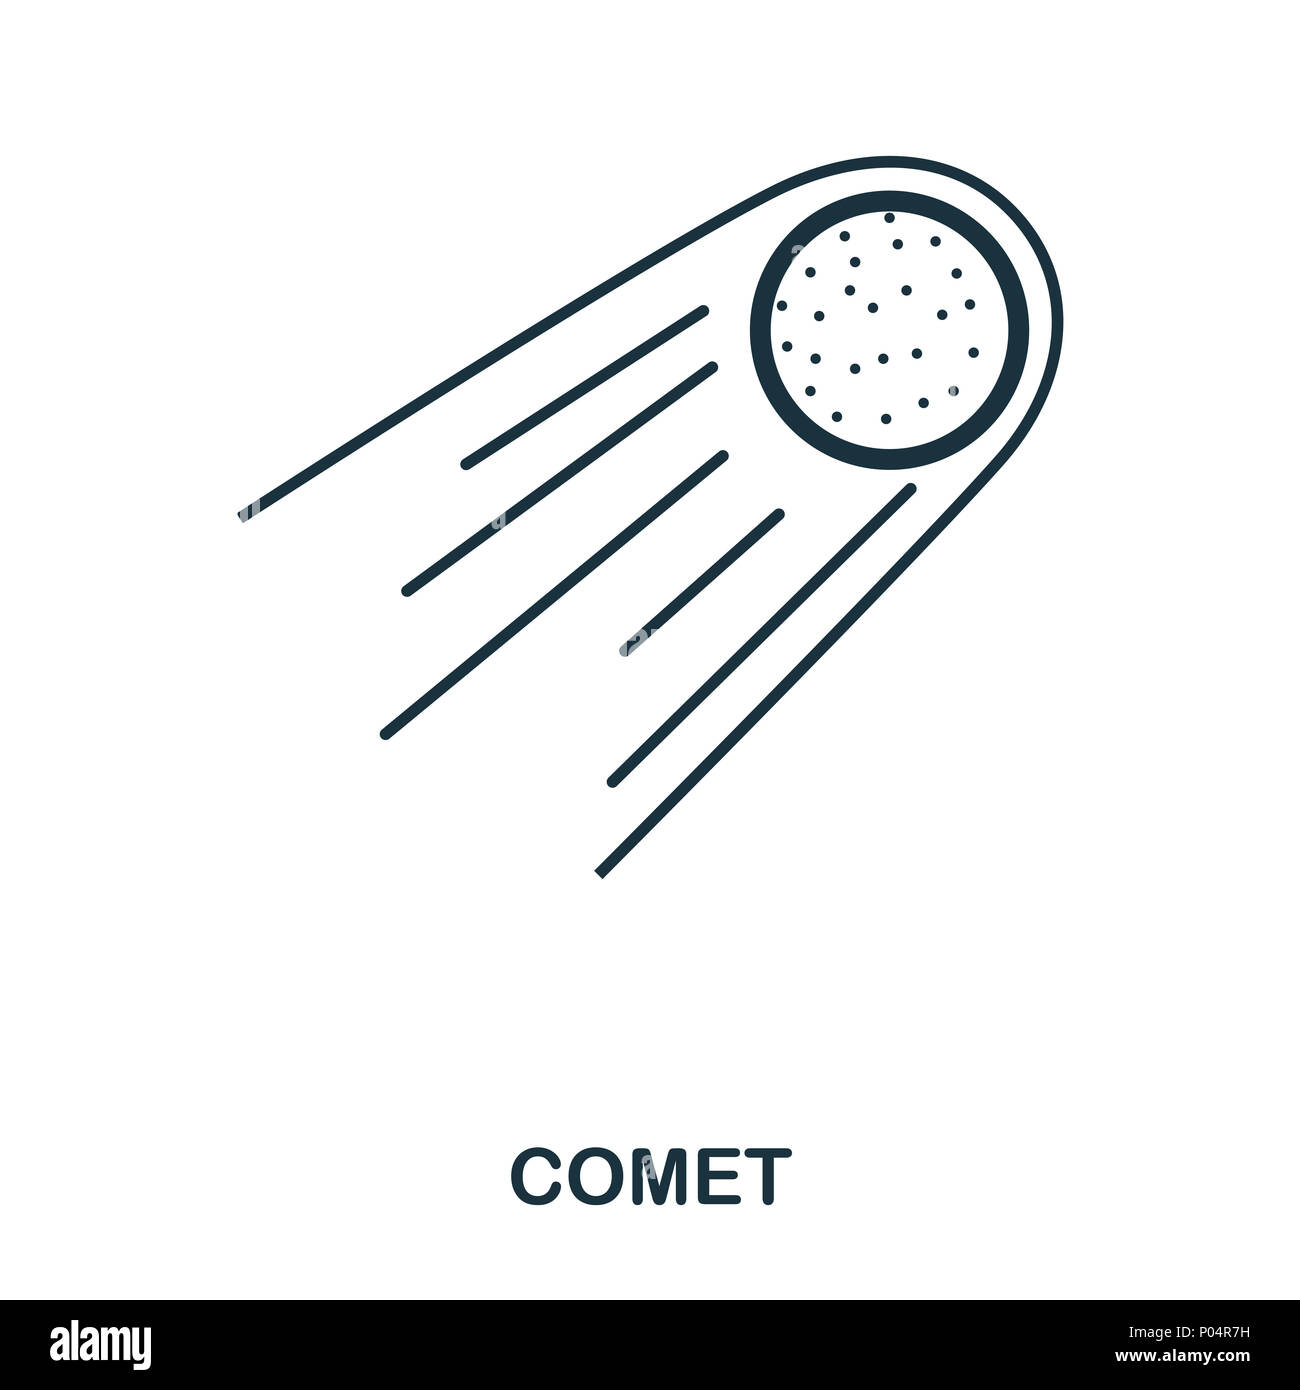 Comet icon. Flat style icon design. UI. Illustration of comet icon. Pictogram isolated on white. Ready to use in web design, apps, software, print. Stock Photo